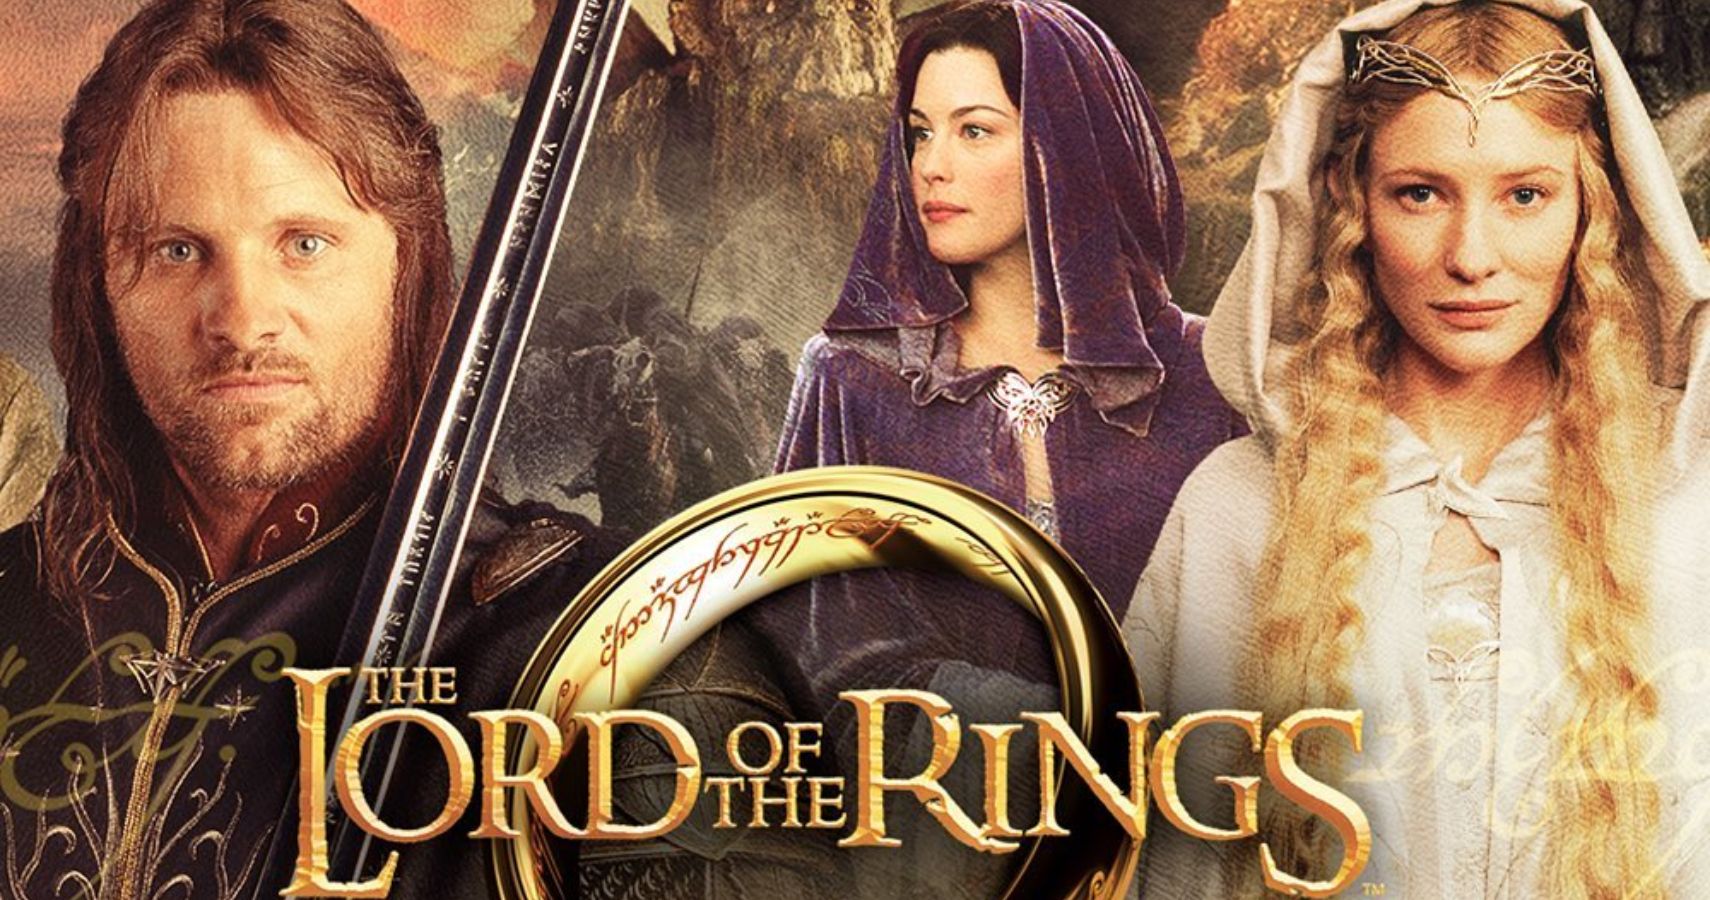 The Lord of the Rings: The Motion Picture Trilogy - Film su Google